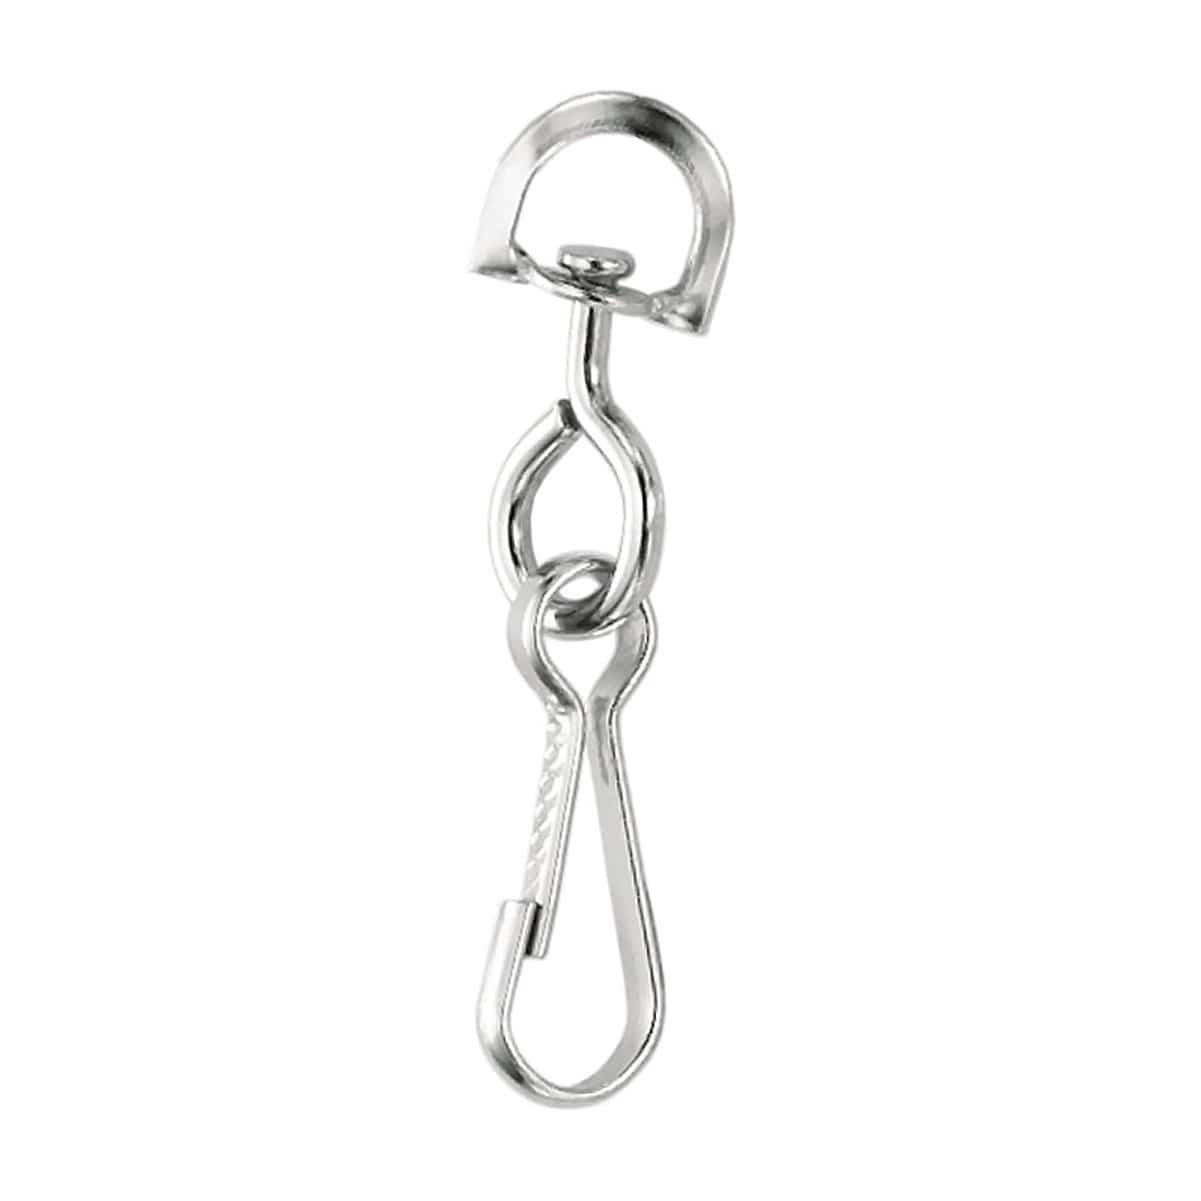 Premium Metal Swivel J Hook Clips with 1/2 inch D Ring - Great for DIY Lanyards & Crafts (6920-2300)